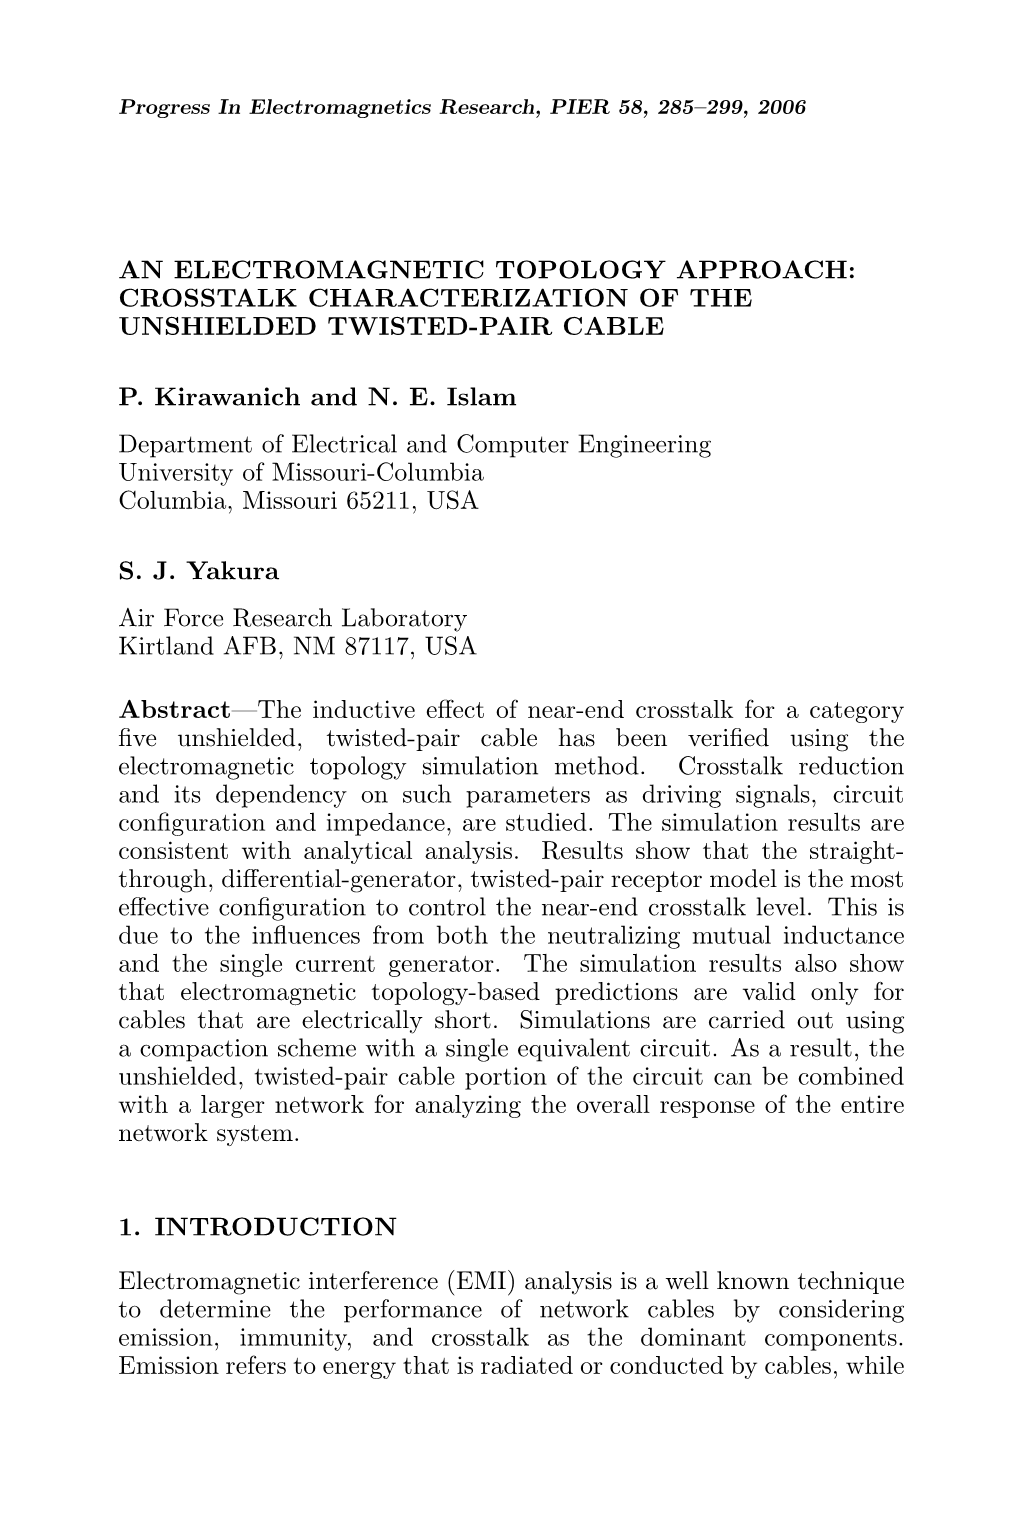 Crosstalk Characterization of the Unshielded Twisted-Pair Cable